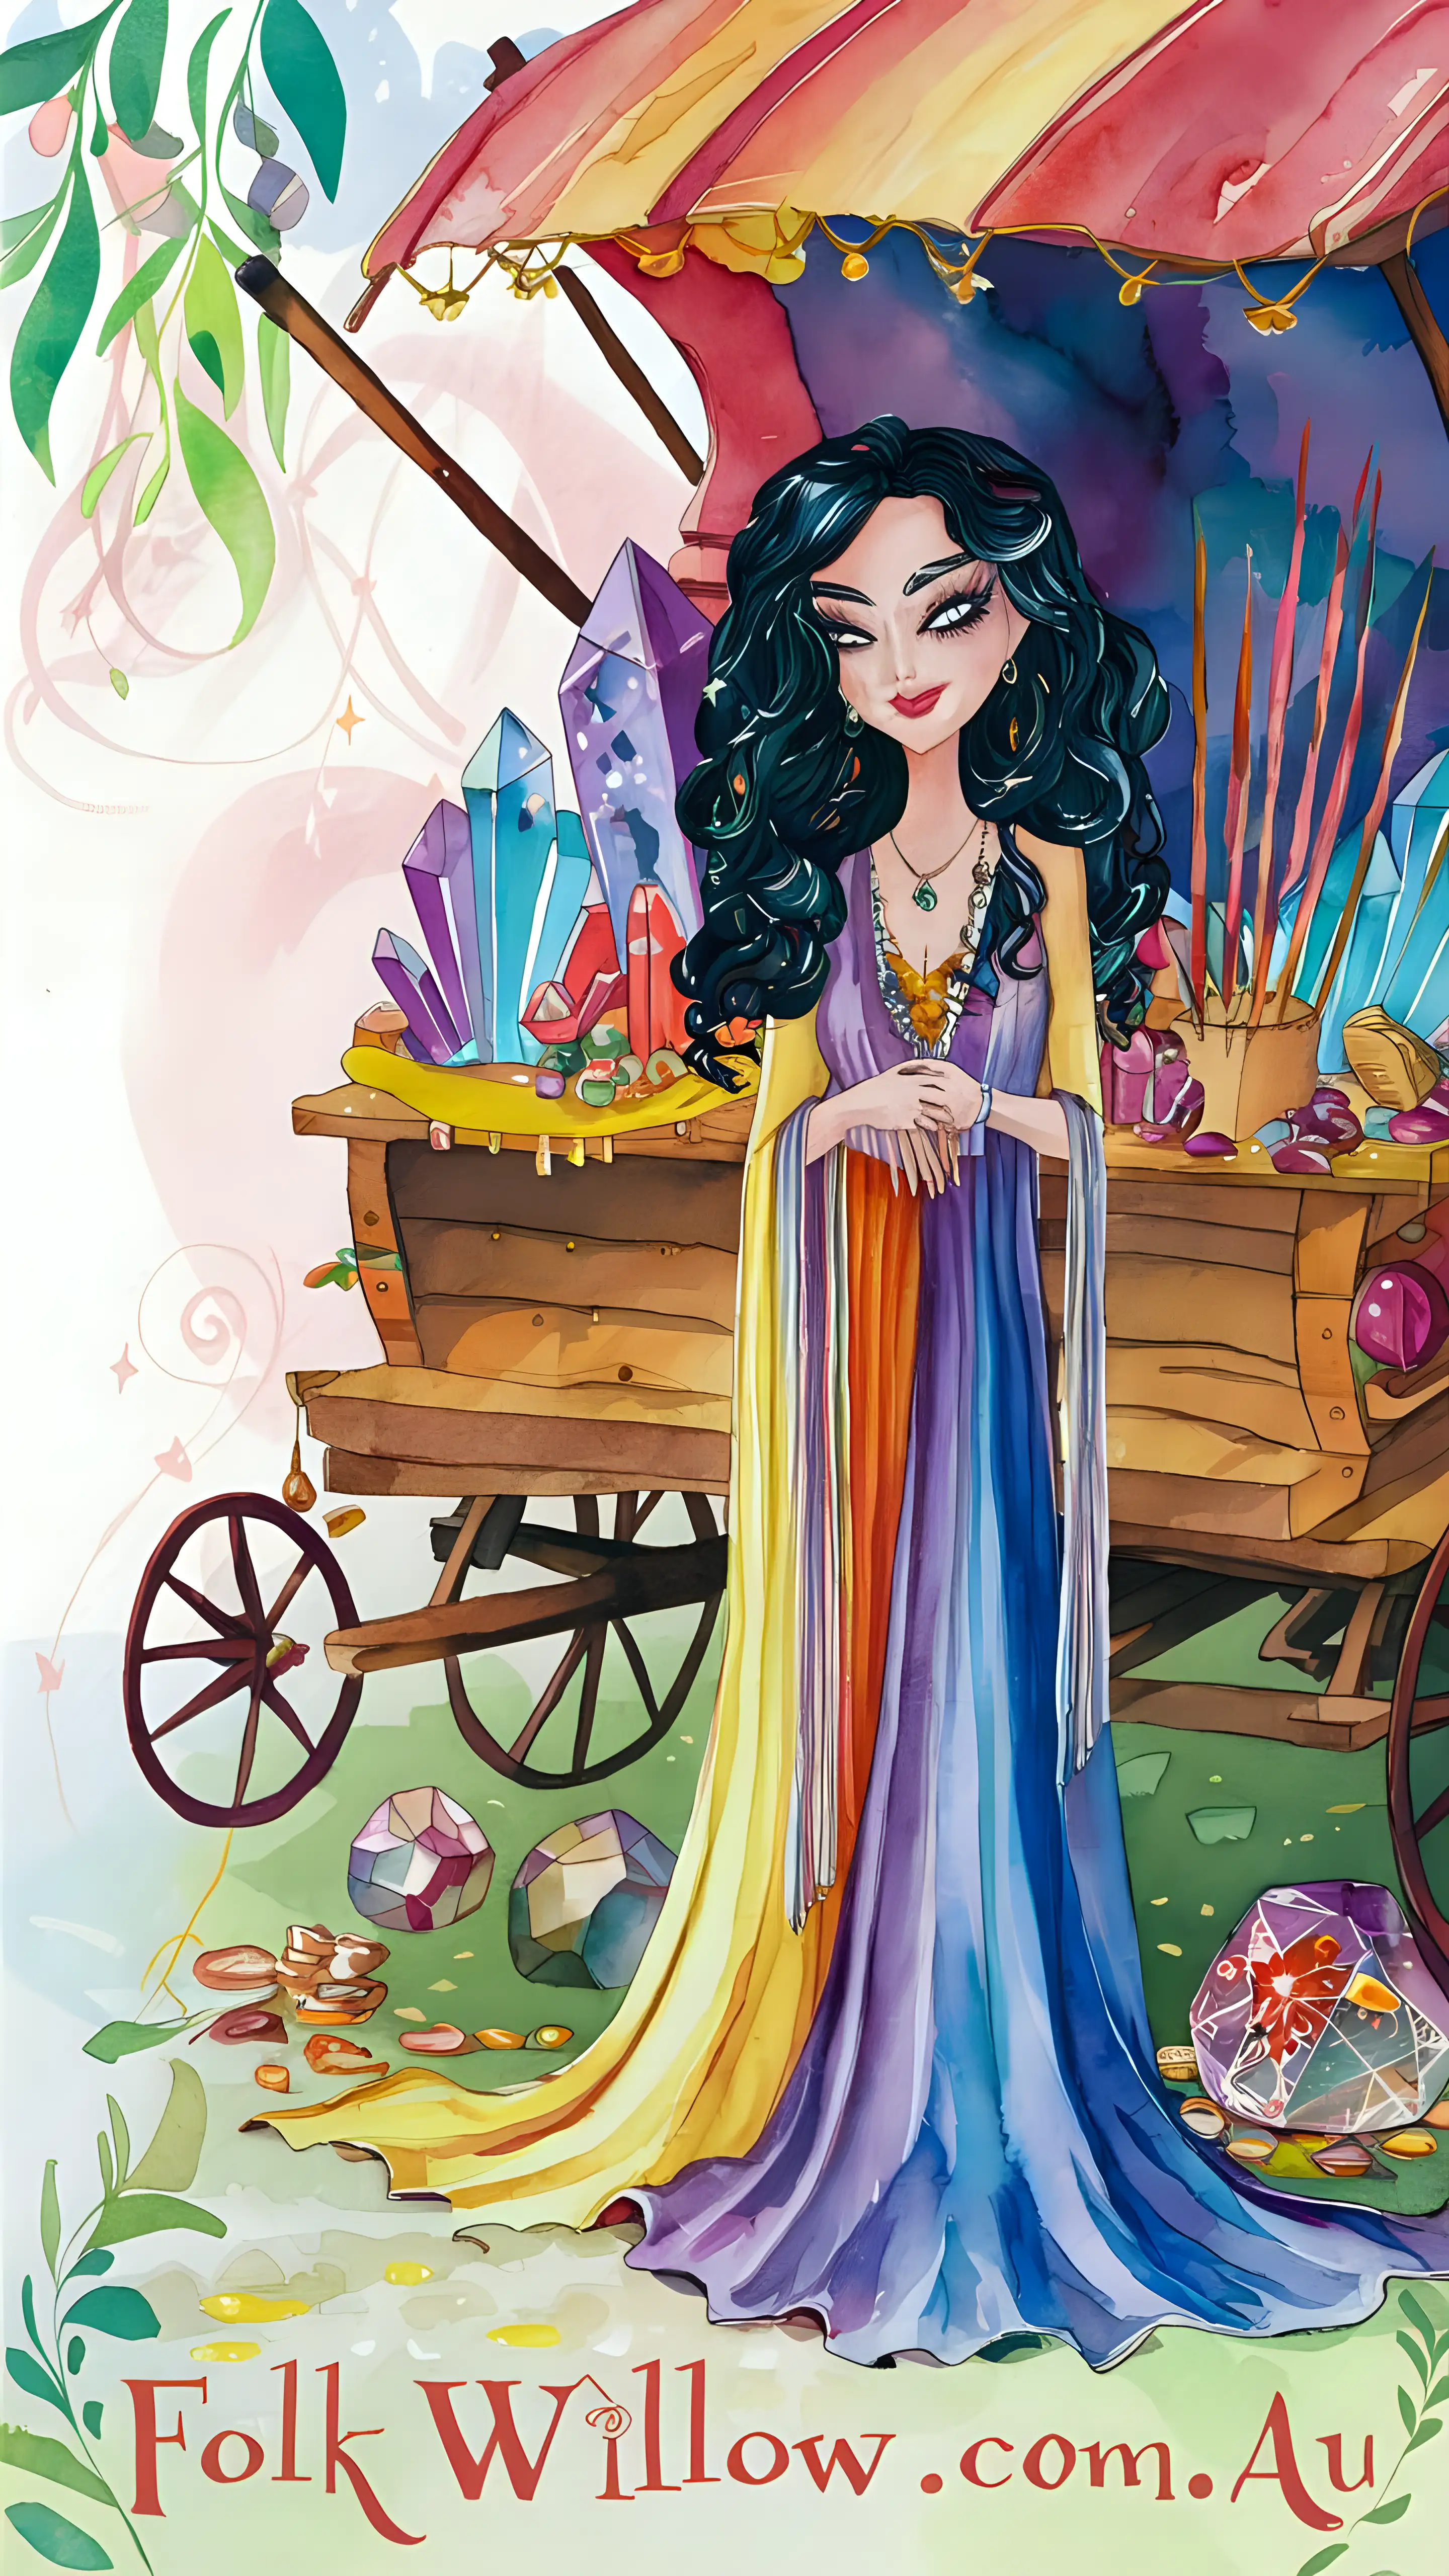 DarkHaired Woman Selling Crystals and Incense in Pastel Watercolor Gypsy Wagon Scene FolkWillowcomau